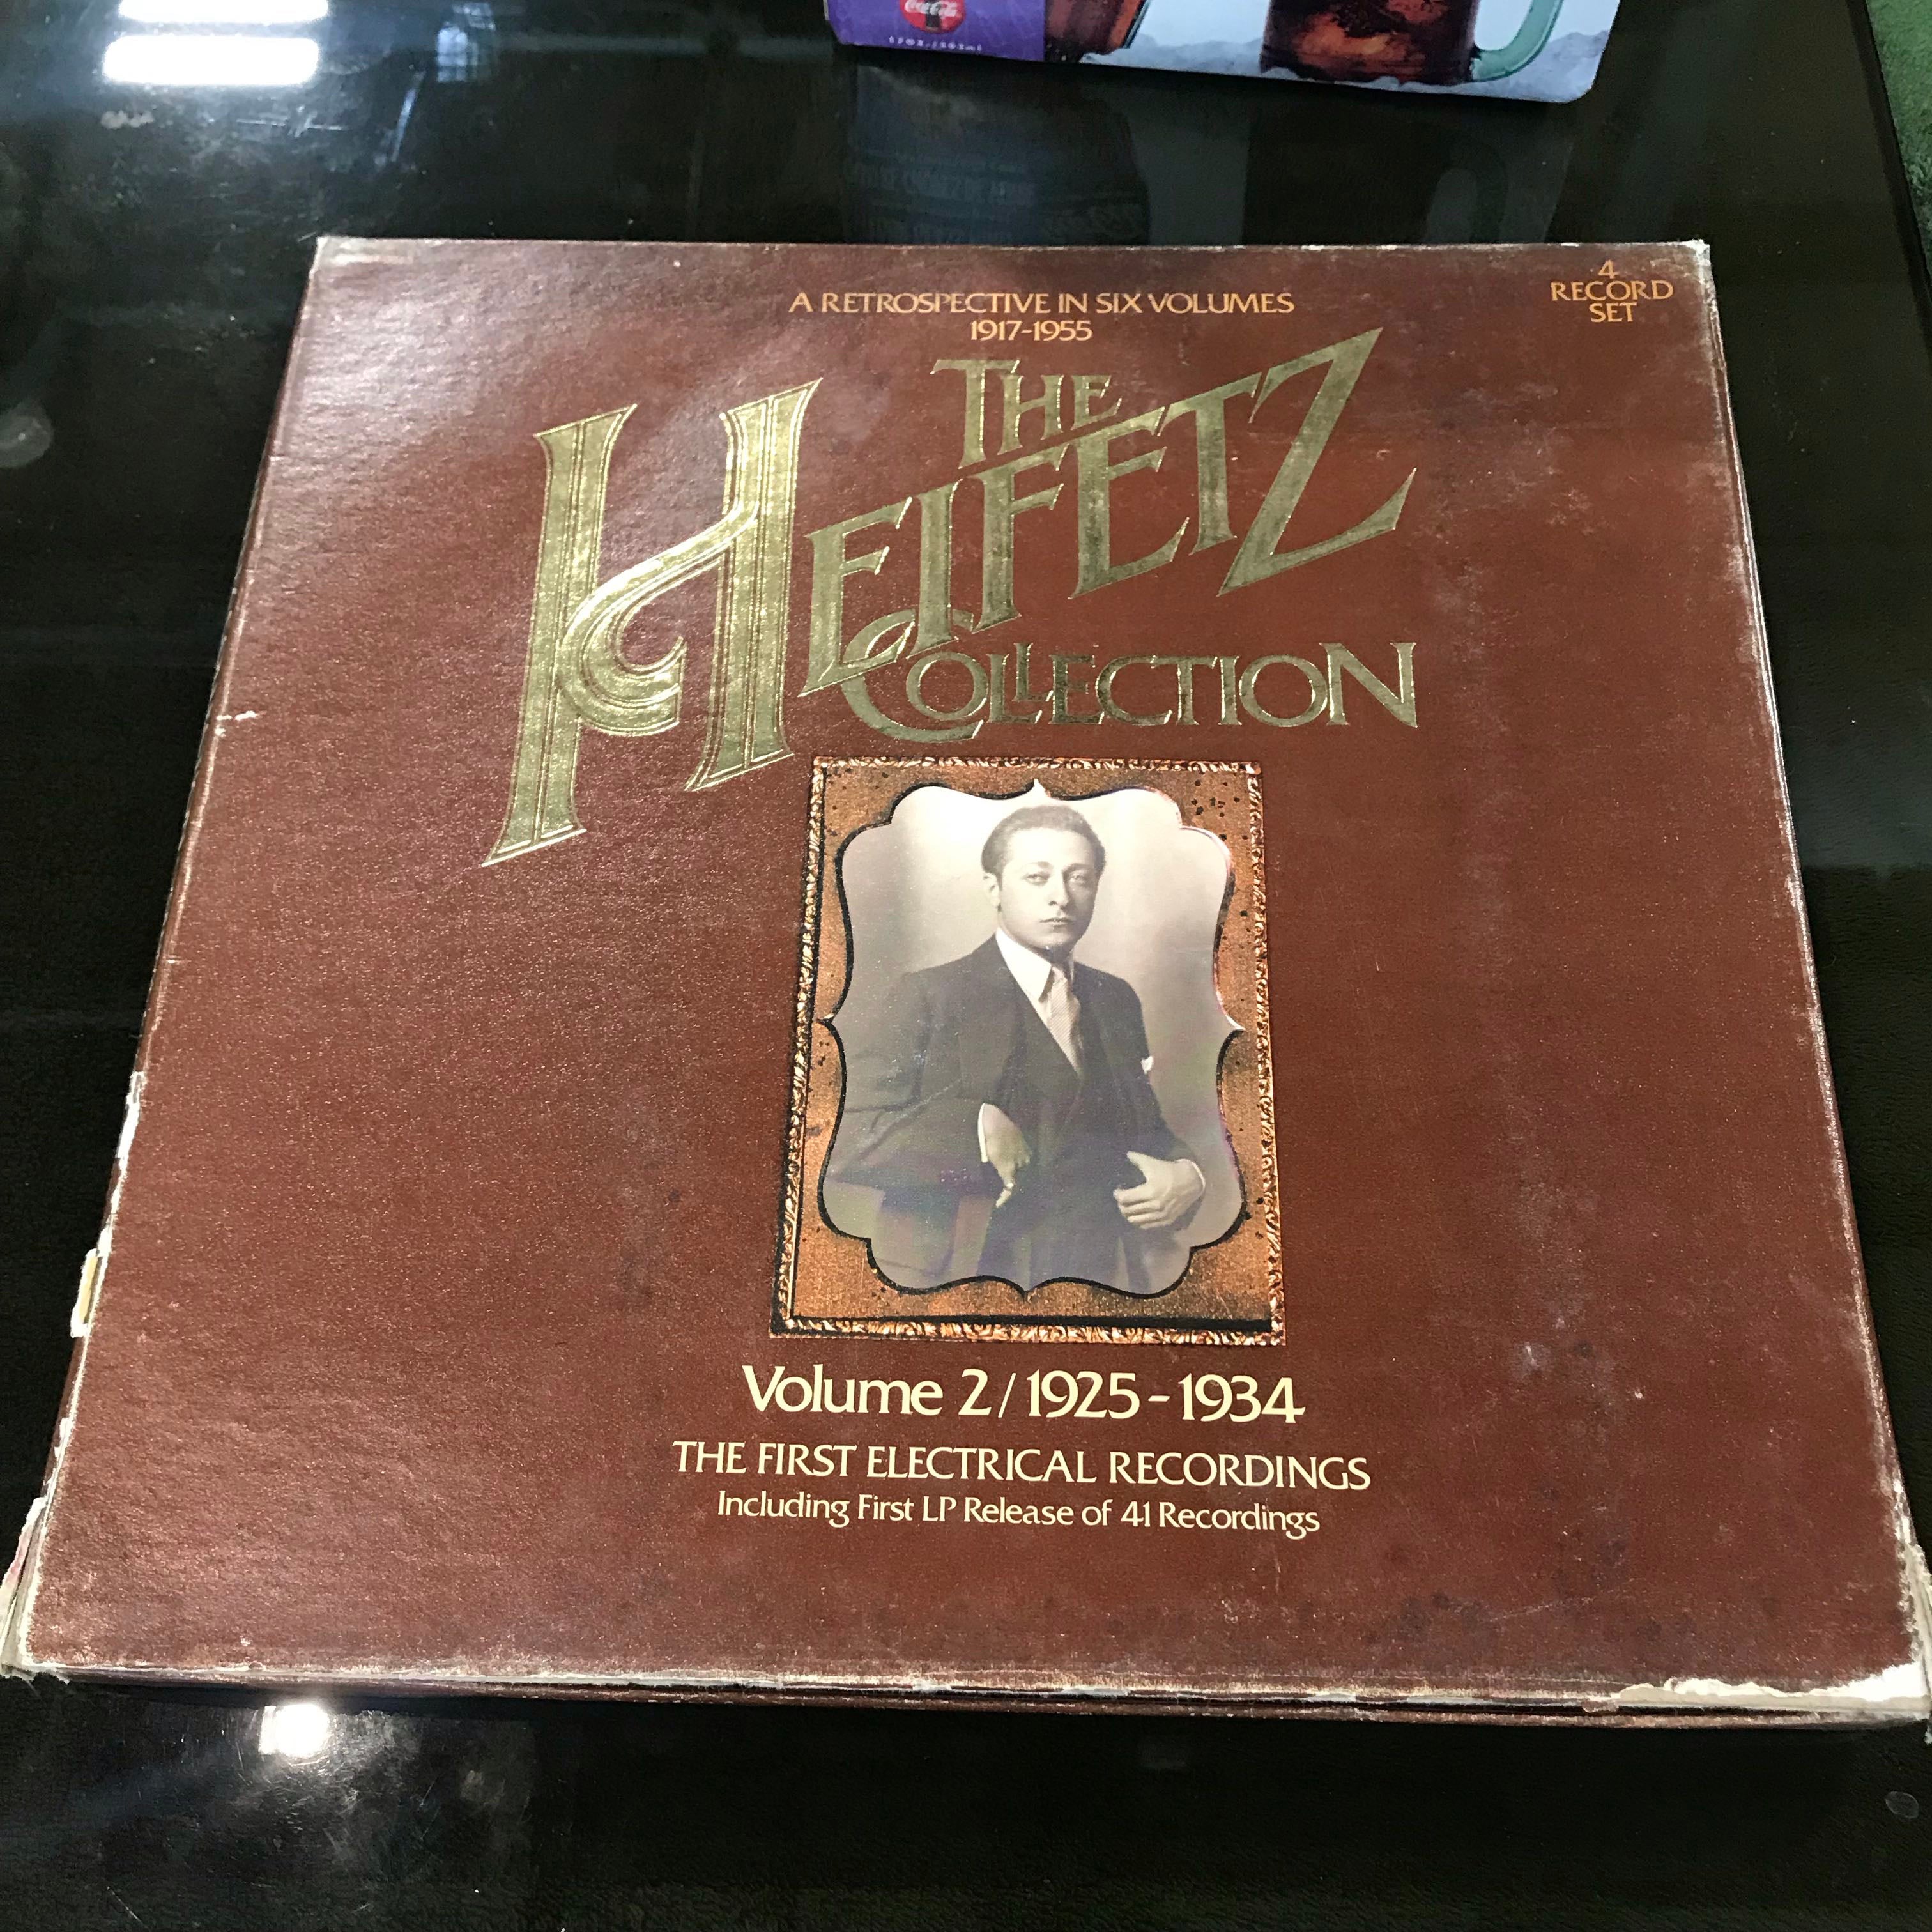 The Heifetz Collection Volume II 1925-1934 Classical Music Compilation LP